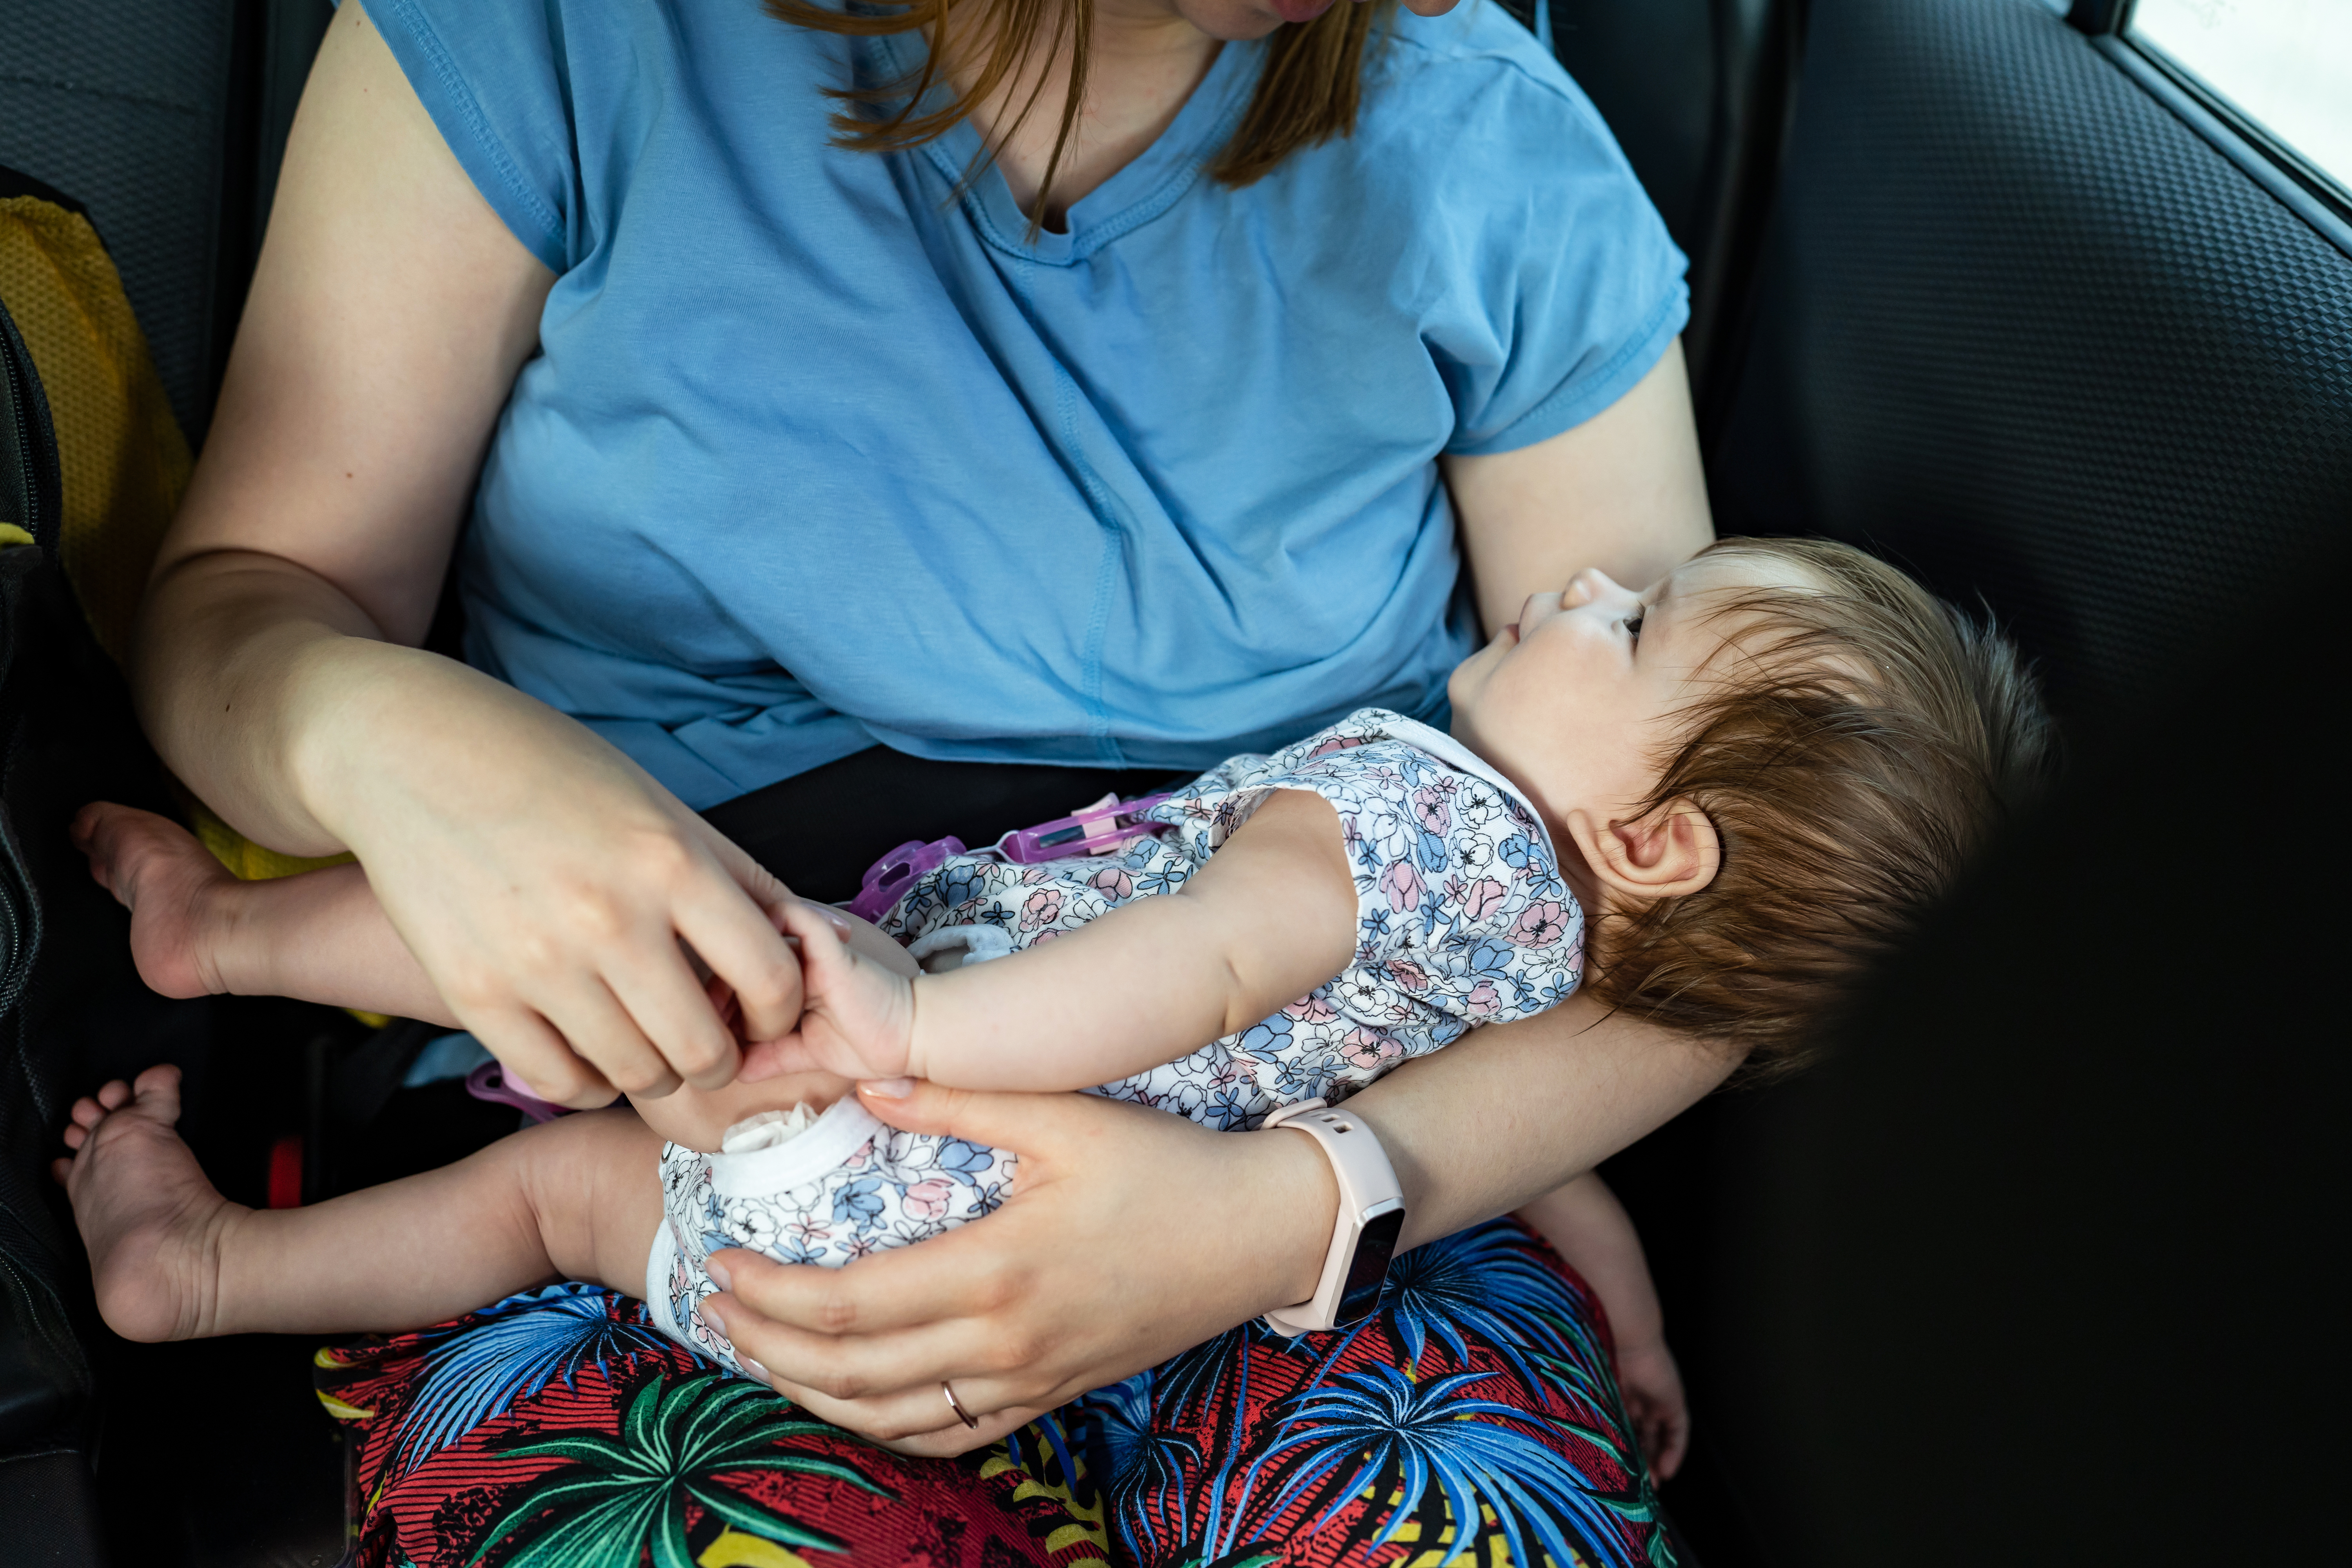 Baby four months old in the lap of her unknown mother holding her on the back seat of the car. | Source: Shutterstock